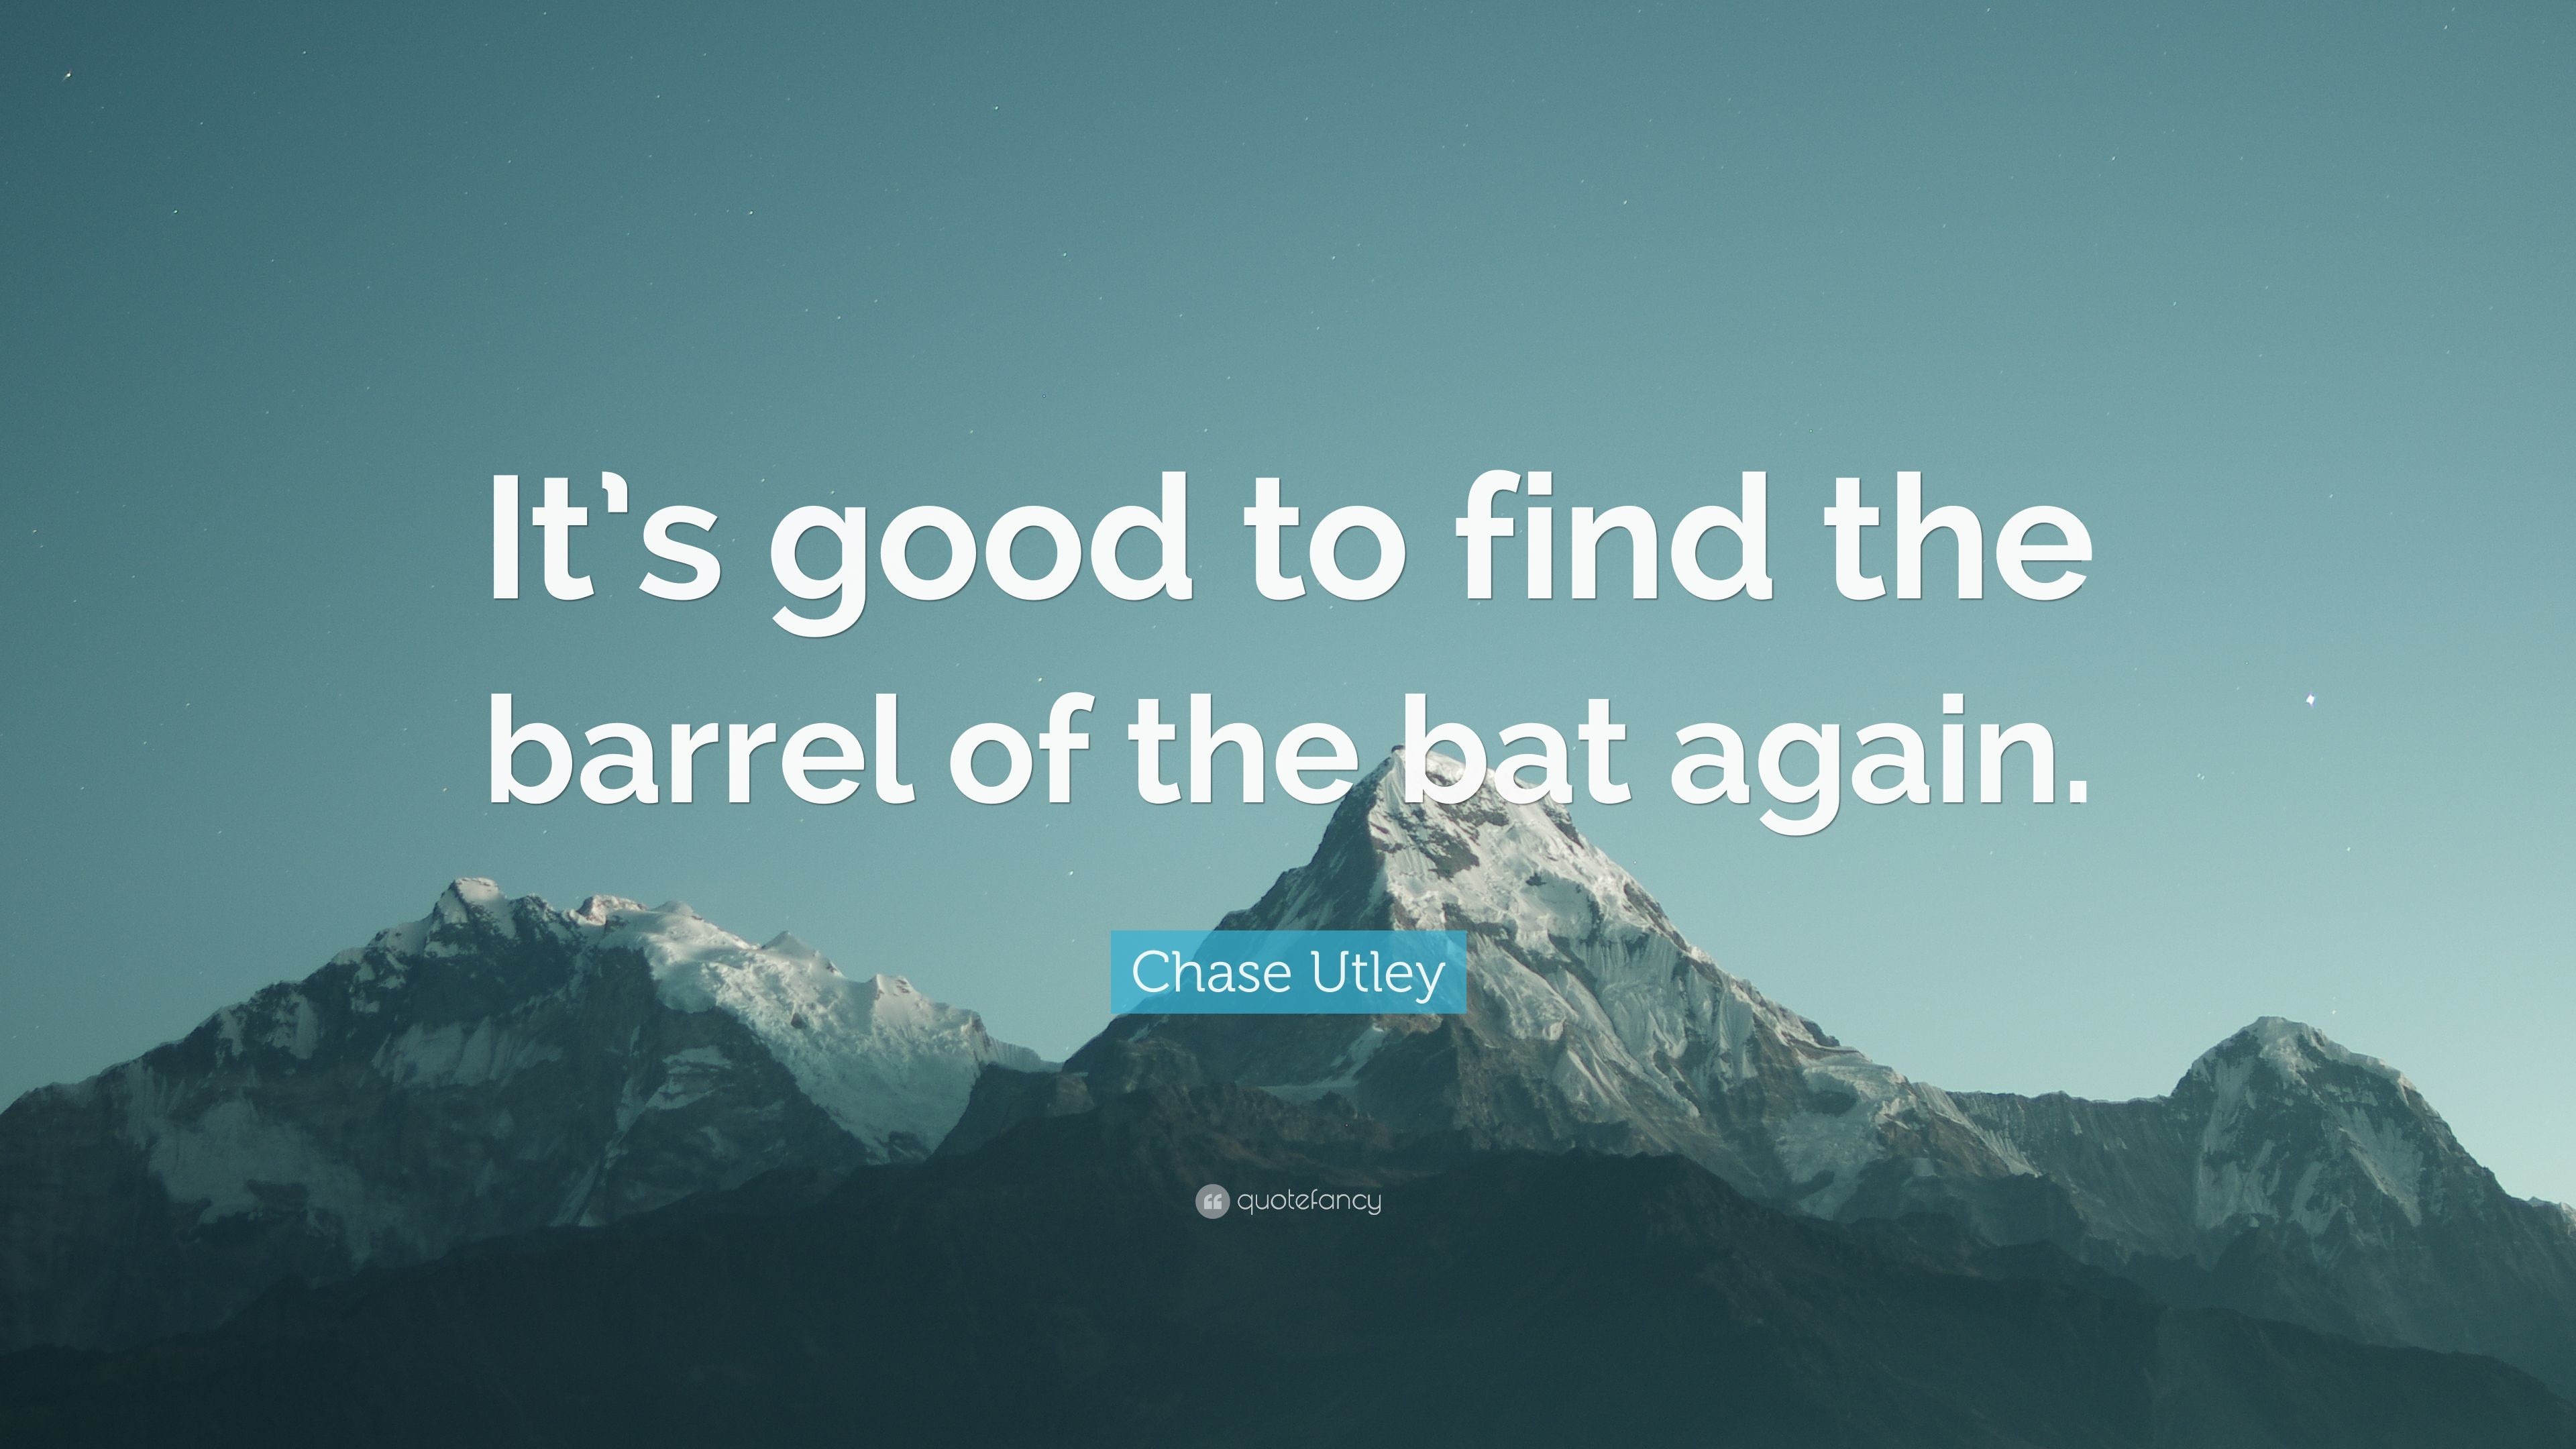 3840x2160 Chase Utley Quote: “It's good to find the barrel of the bat again.